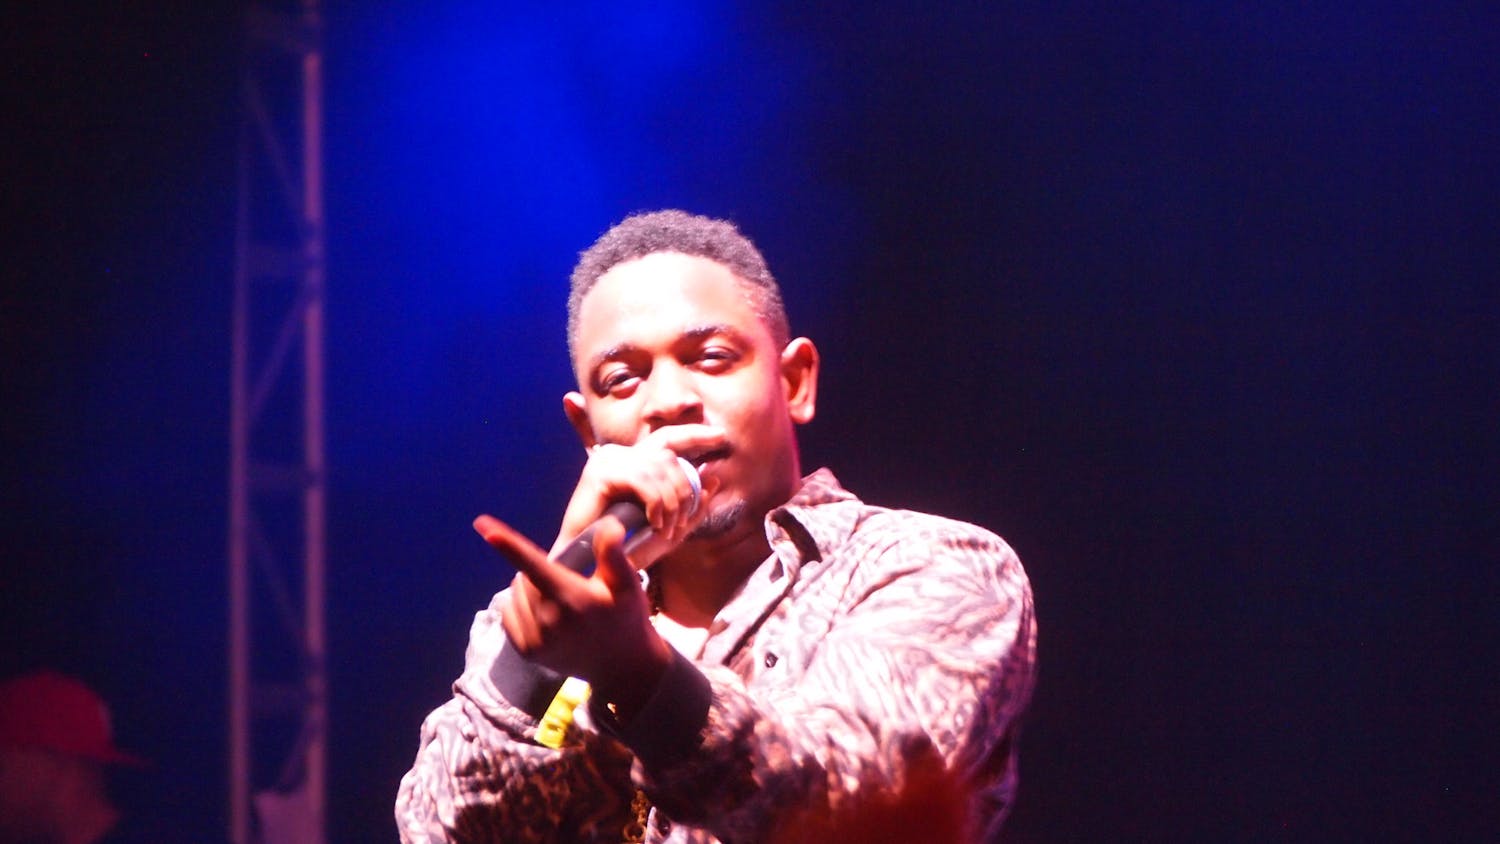 Rappers produce songs with lyrics lacking substance, whereas MCs such as Kendrick Lamar produce more complex content. (Photo courtesy of Flickr / Jon Elbaz, June 7, 2012)